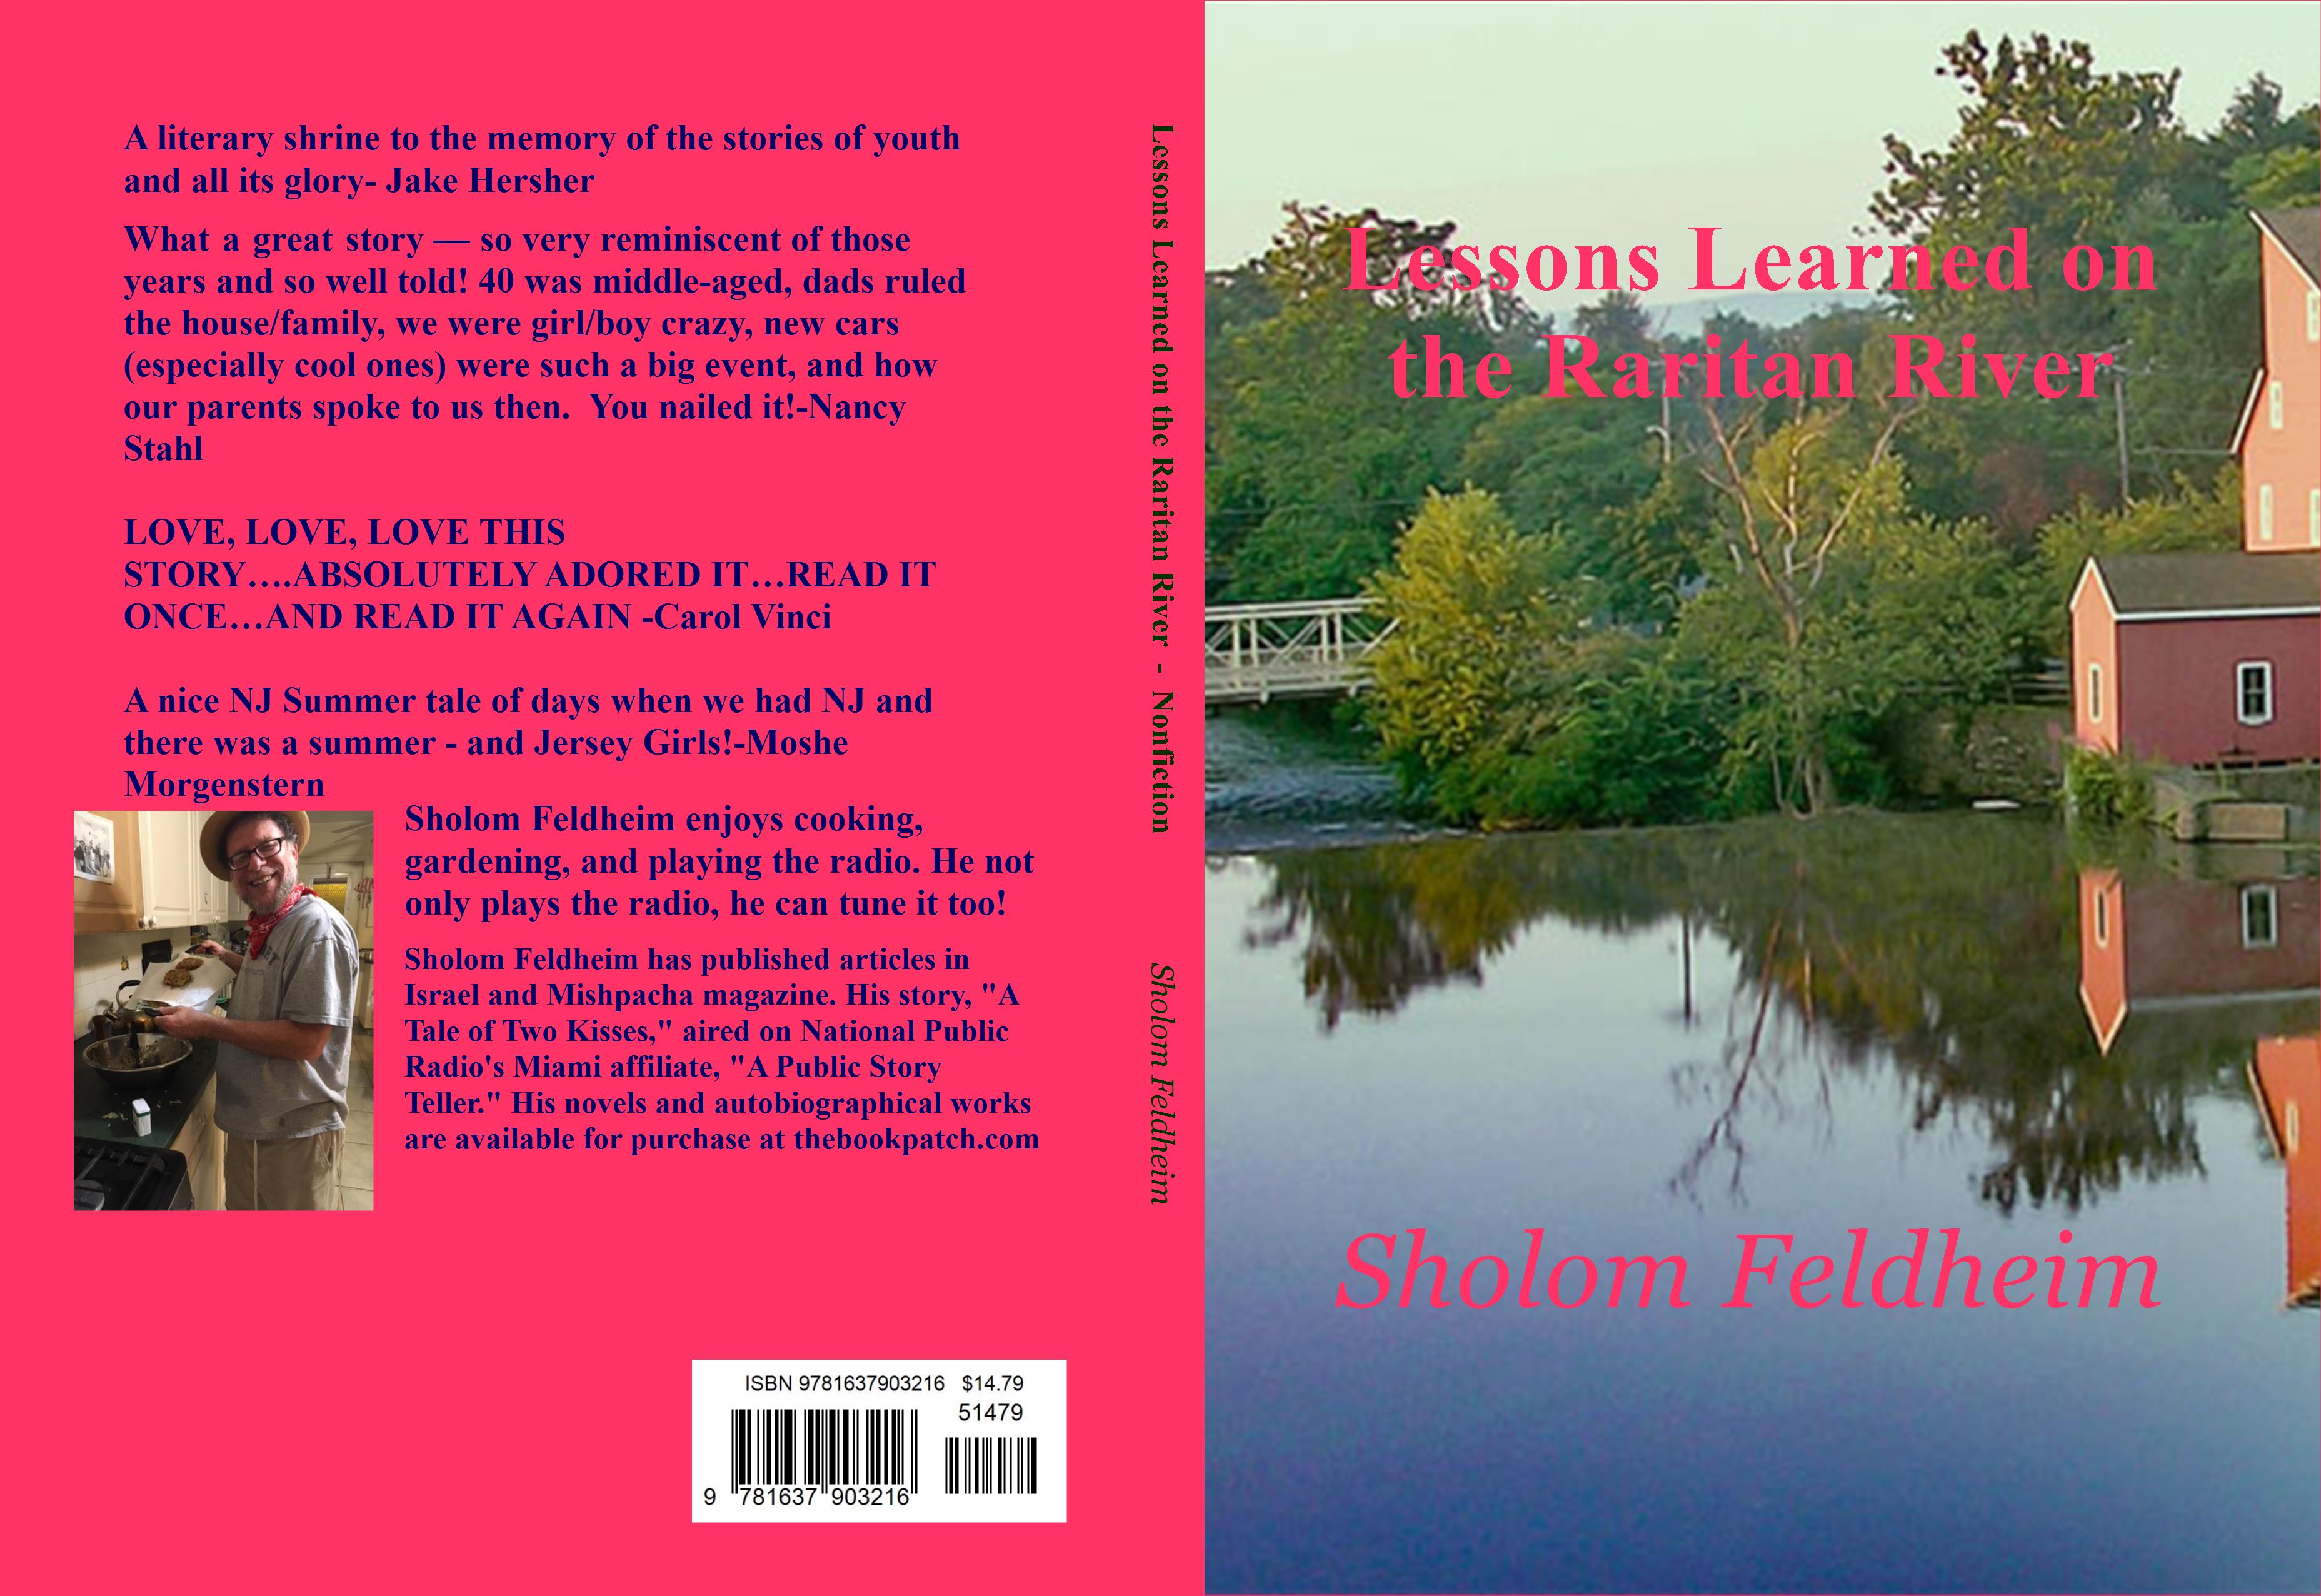 Lessons Learned on the Raritan River cover image